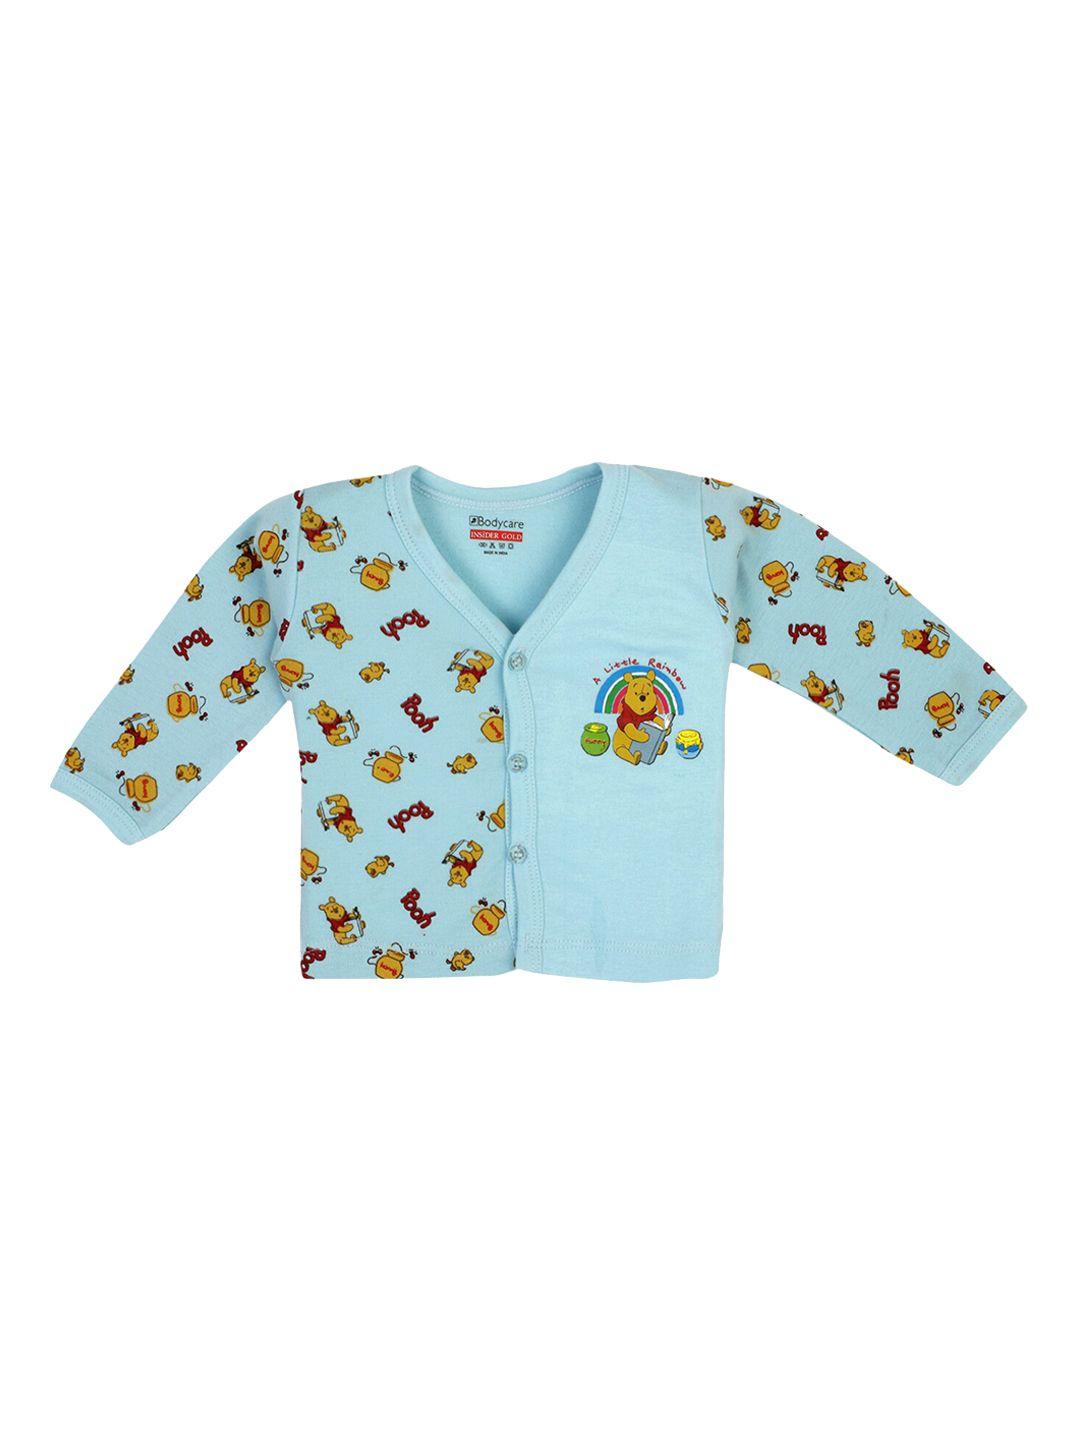 bodycare-kids-infant-boys-blue-printed-cotton-thermal-tops